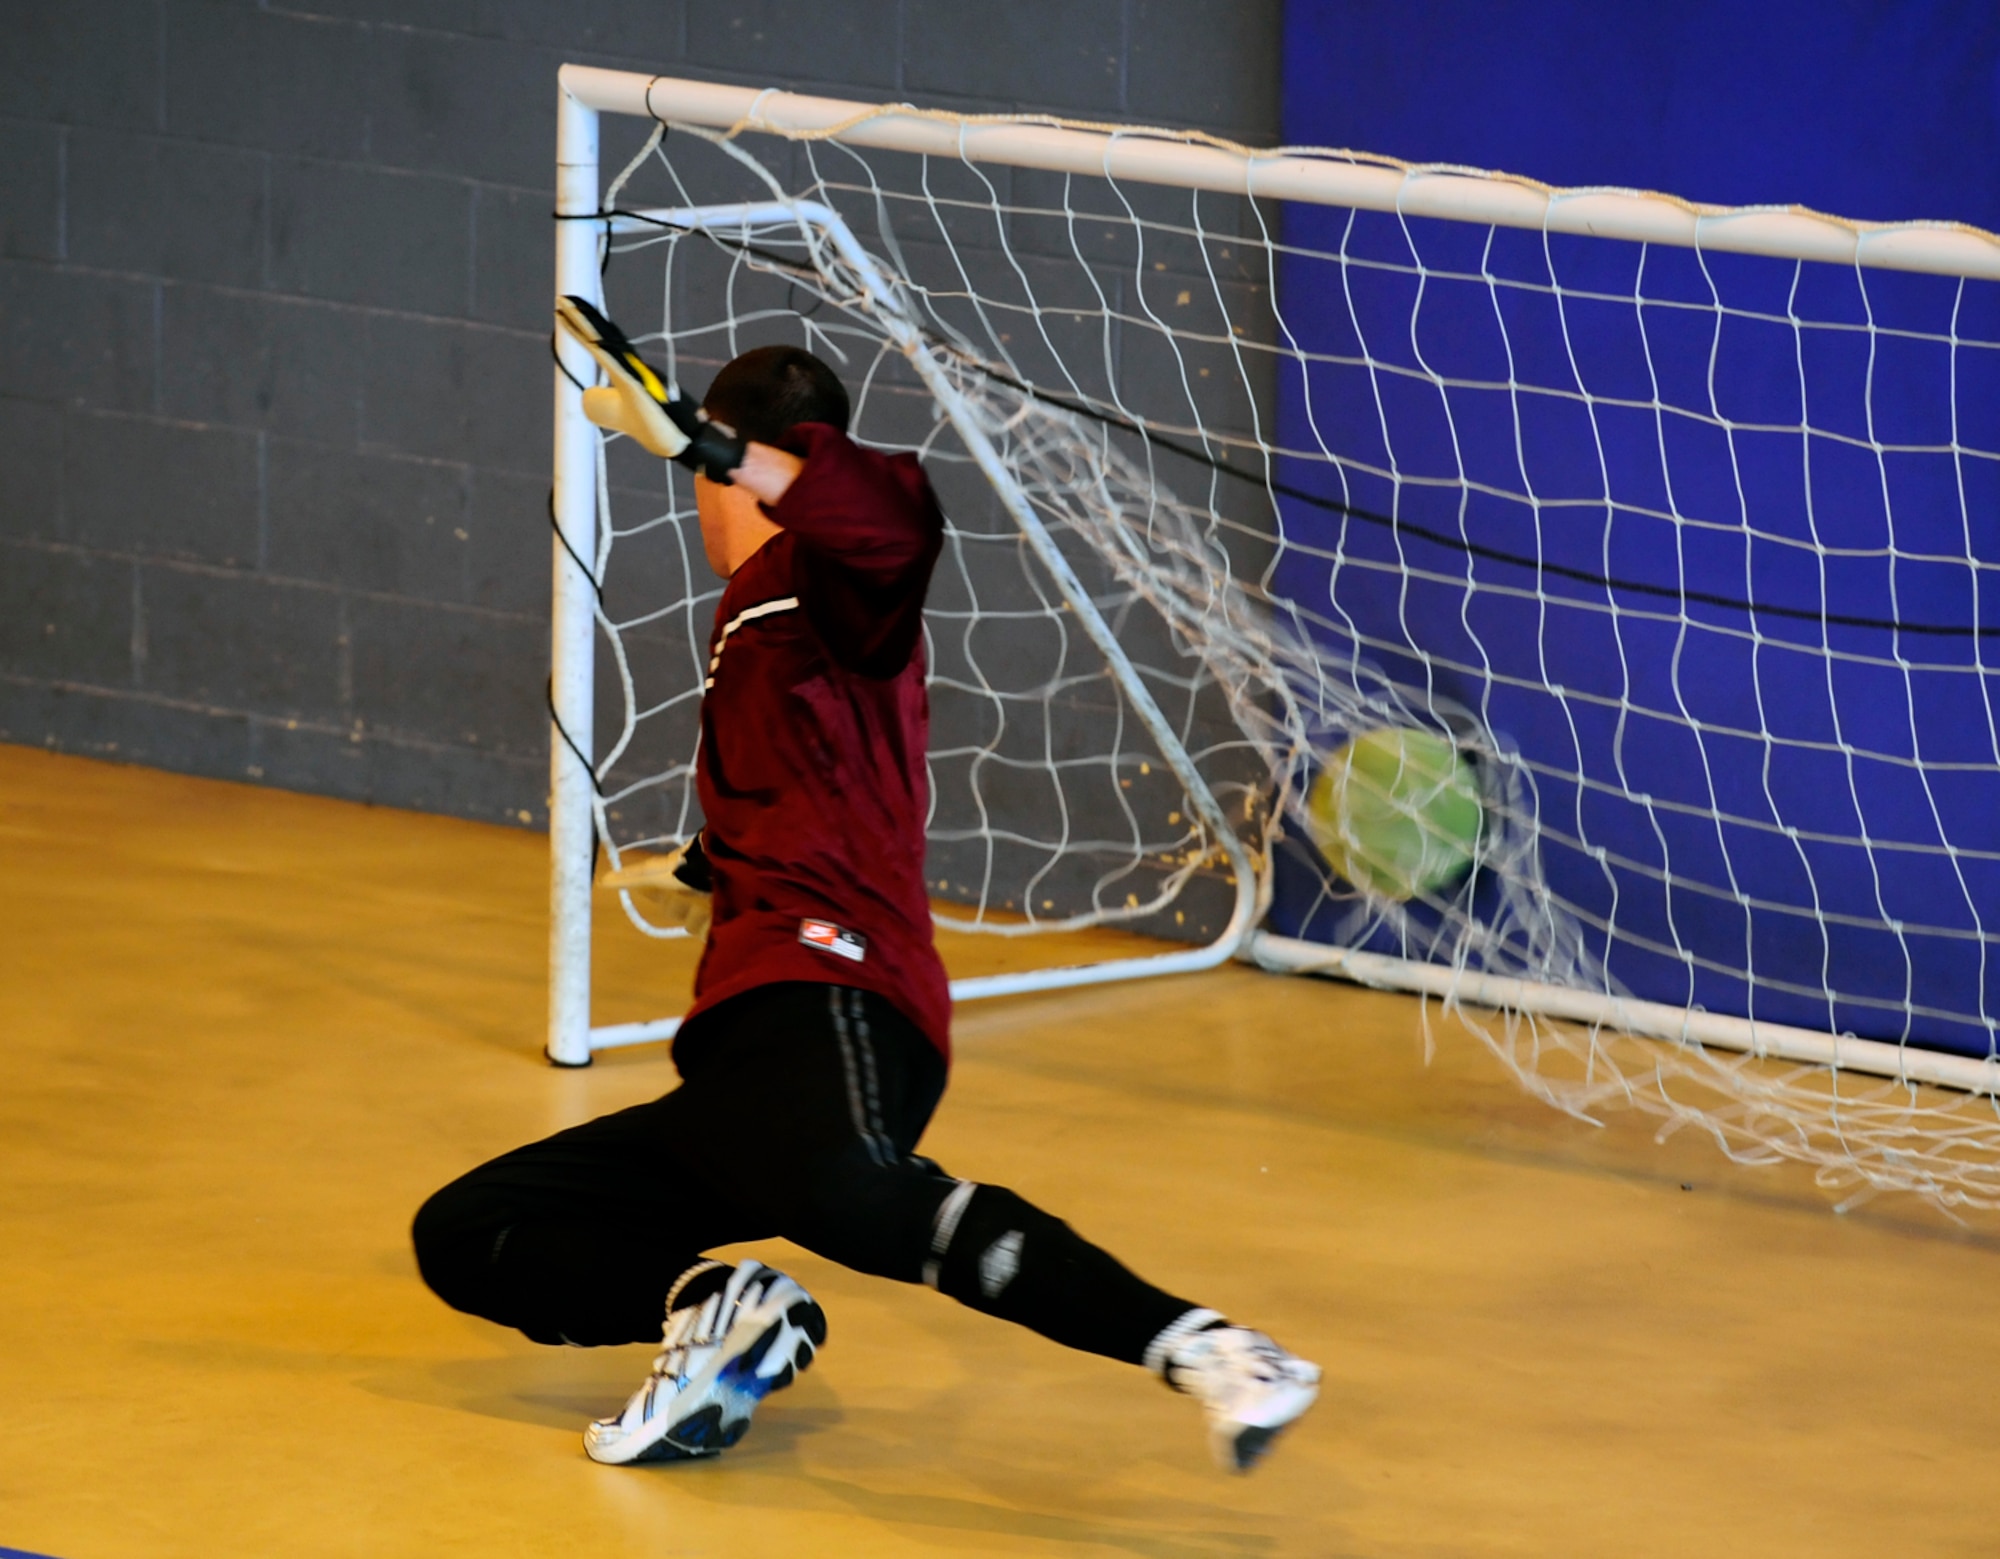 RAF MILDENHALL, England  -- Kenneth King, the 352nd Special Operations Group  keeper, dives in vain, as a powerful shot from Aaron Cooper flies in the back of the net. King’s team were beaten 8-1 by the 100th Civil Engineer Squadron, in the RAF Mildenhall Intramural Indoor Soccer Championship at the North Side Fitness Center, May 20, 2011. (U.S. Air Force photo/Senior Airman Ethan Morgan)